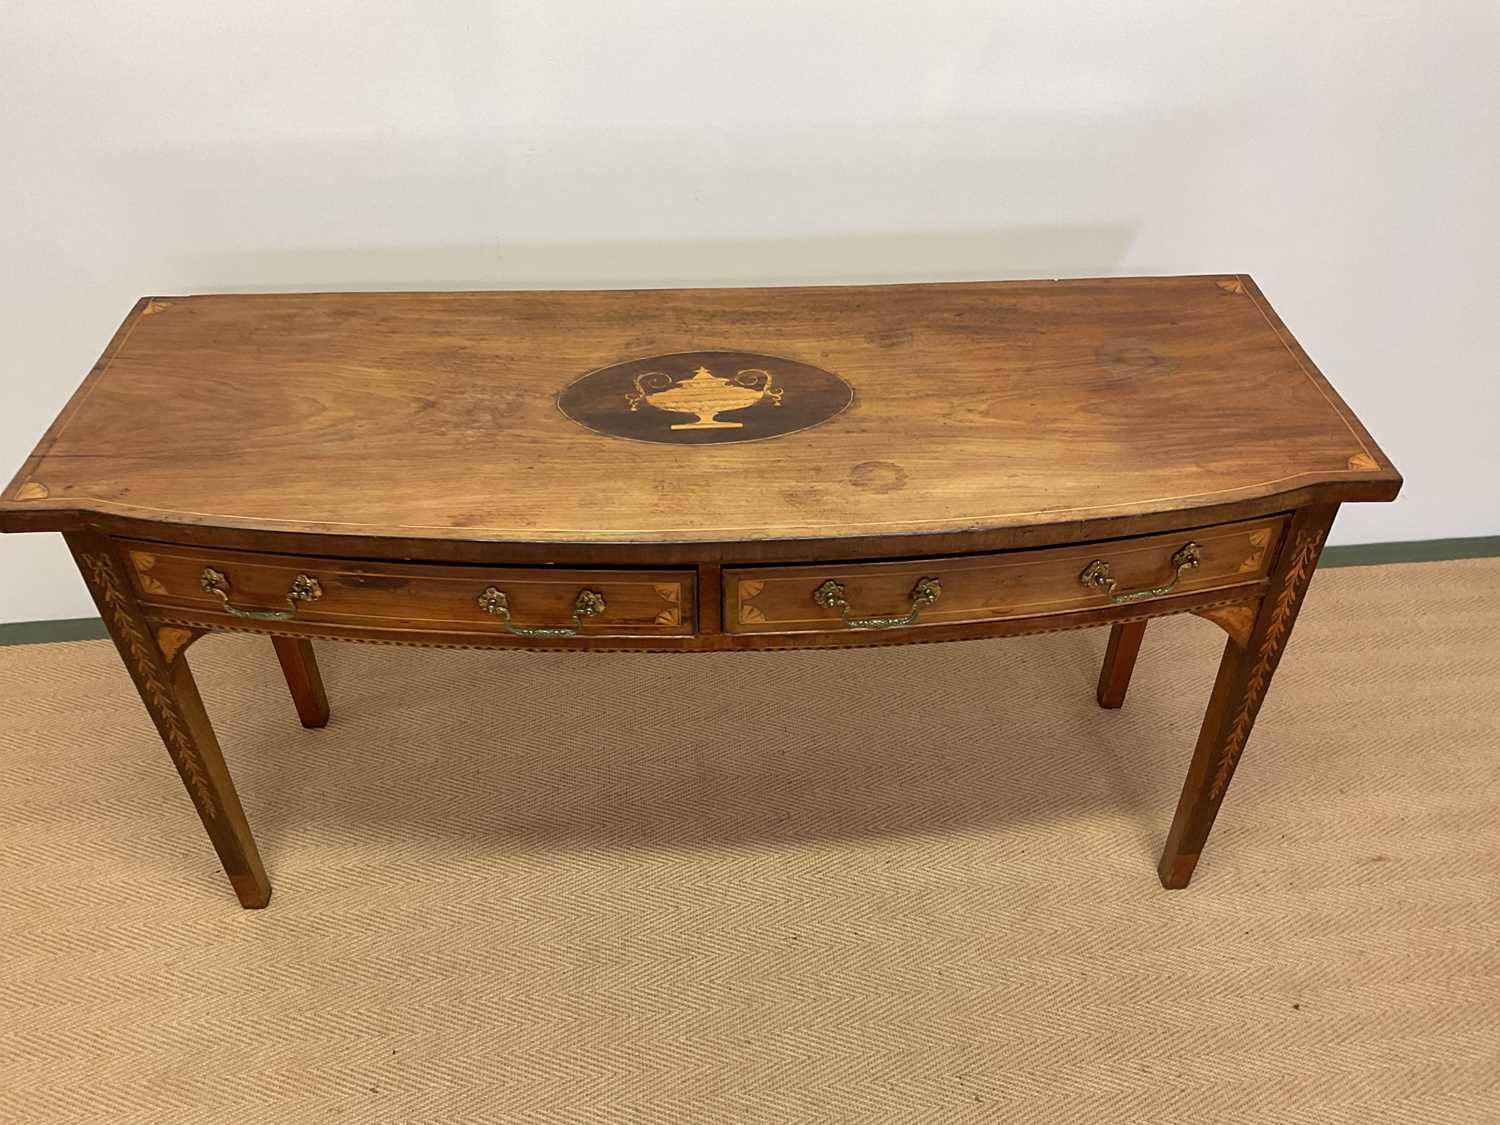 An early 19th century mahogany and inlaid bowfronted serving table with two frieze drawers raised on - Image 2 of 6